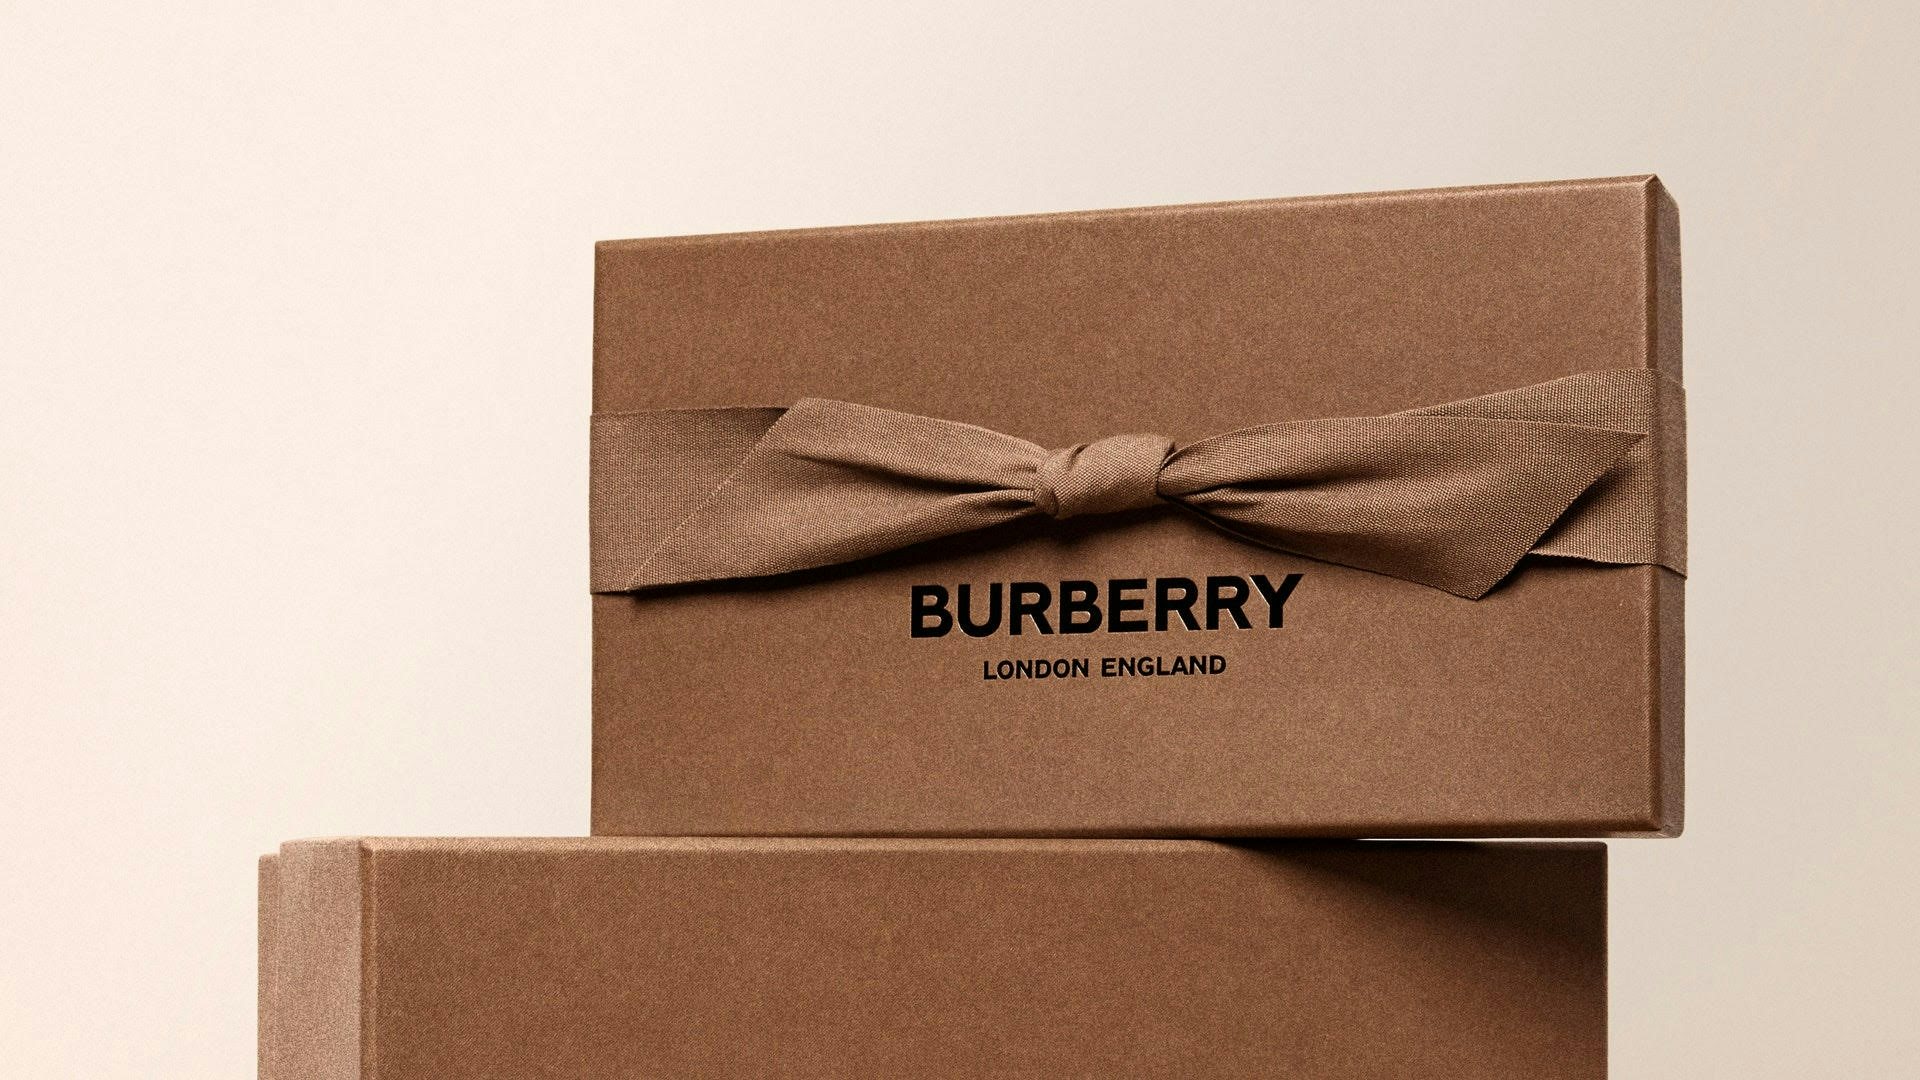 Research shows that luxury brands must prioritize sustainability to appeal to younger customers in China, but does that truly translate to sales? Photo: Courtesy of Burberry